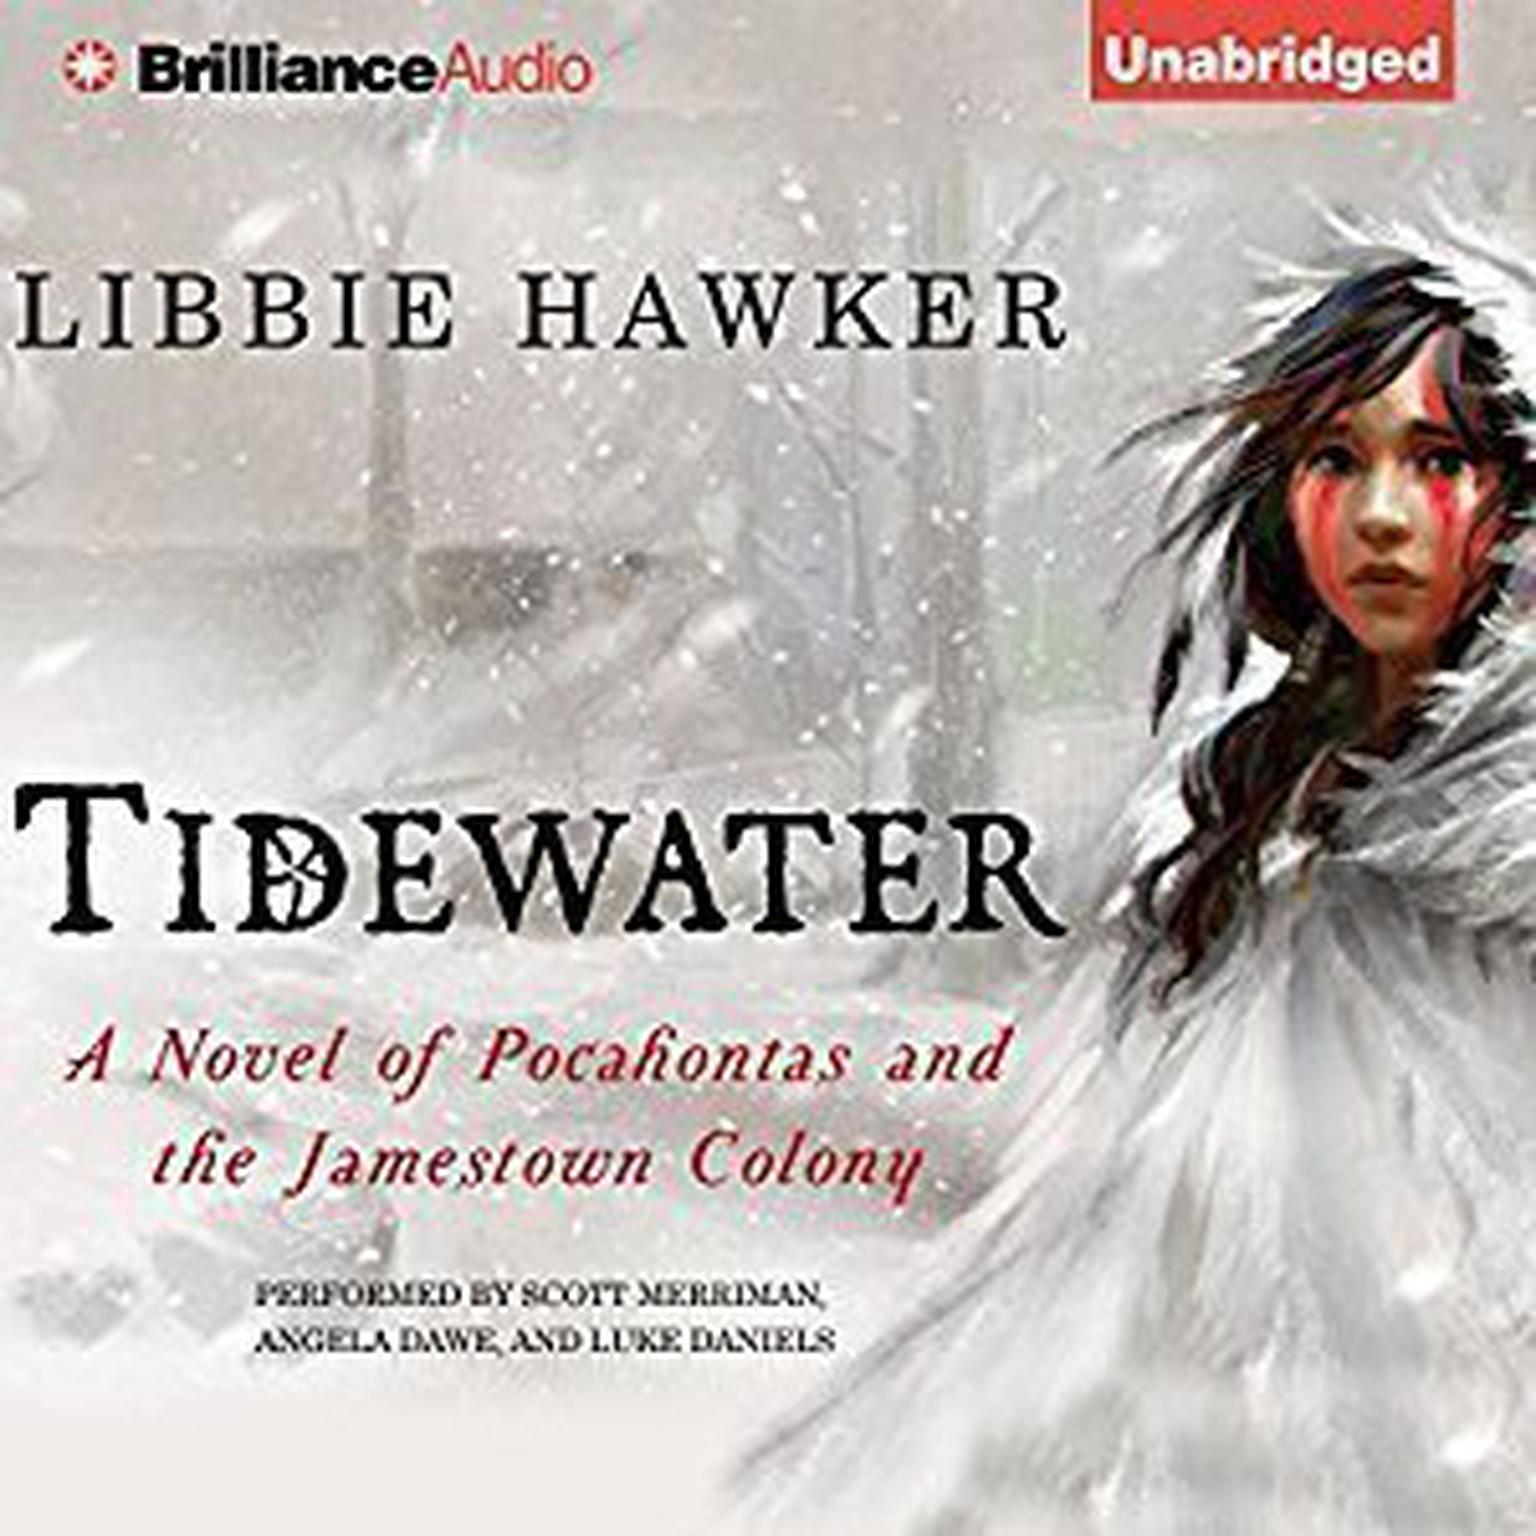 Tidewater: A Novel of Pocahontas and the Jamestown Colony Audiobook, by Libbie Hawker